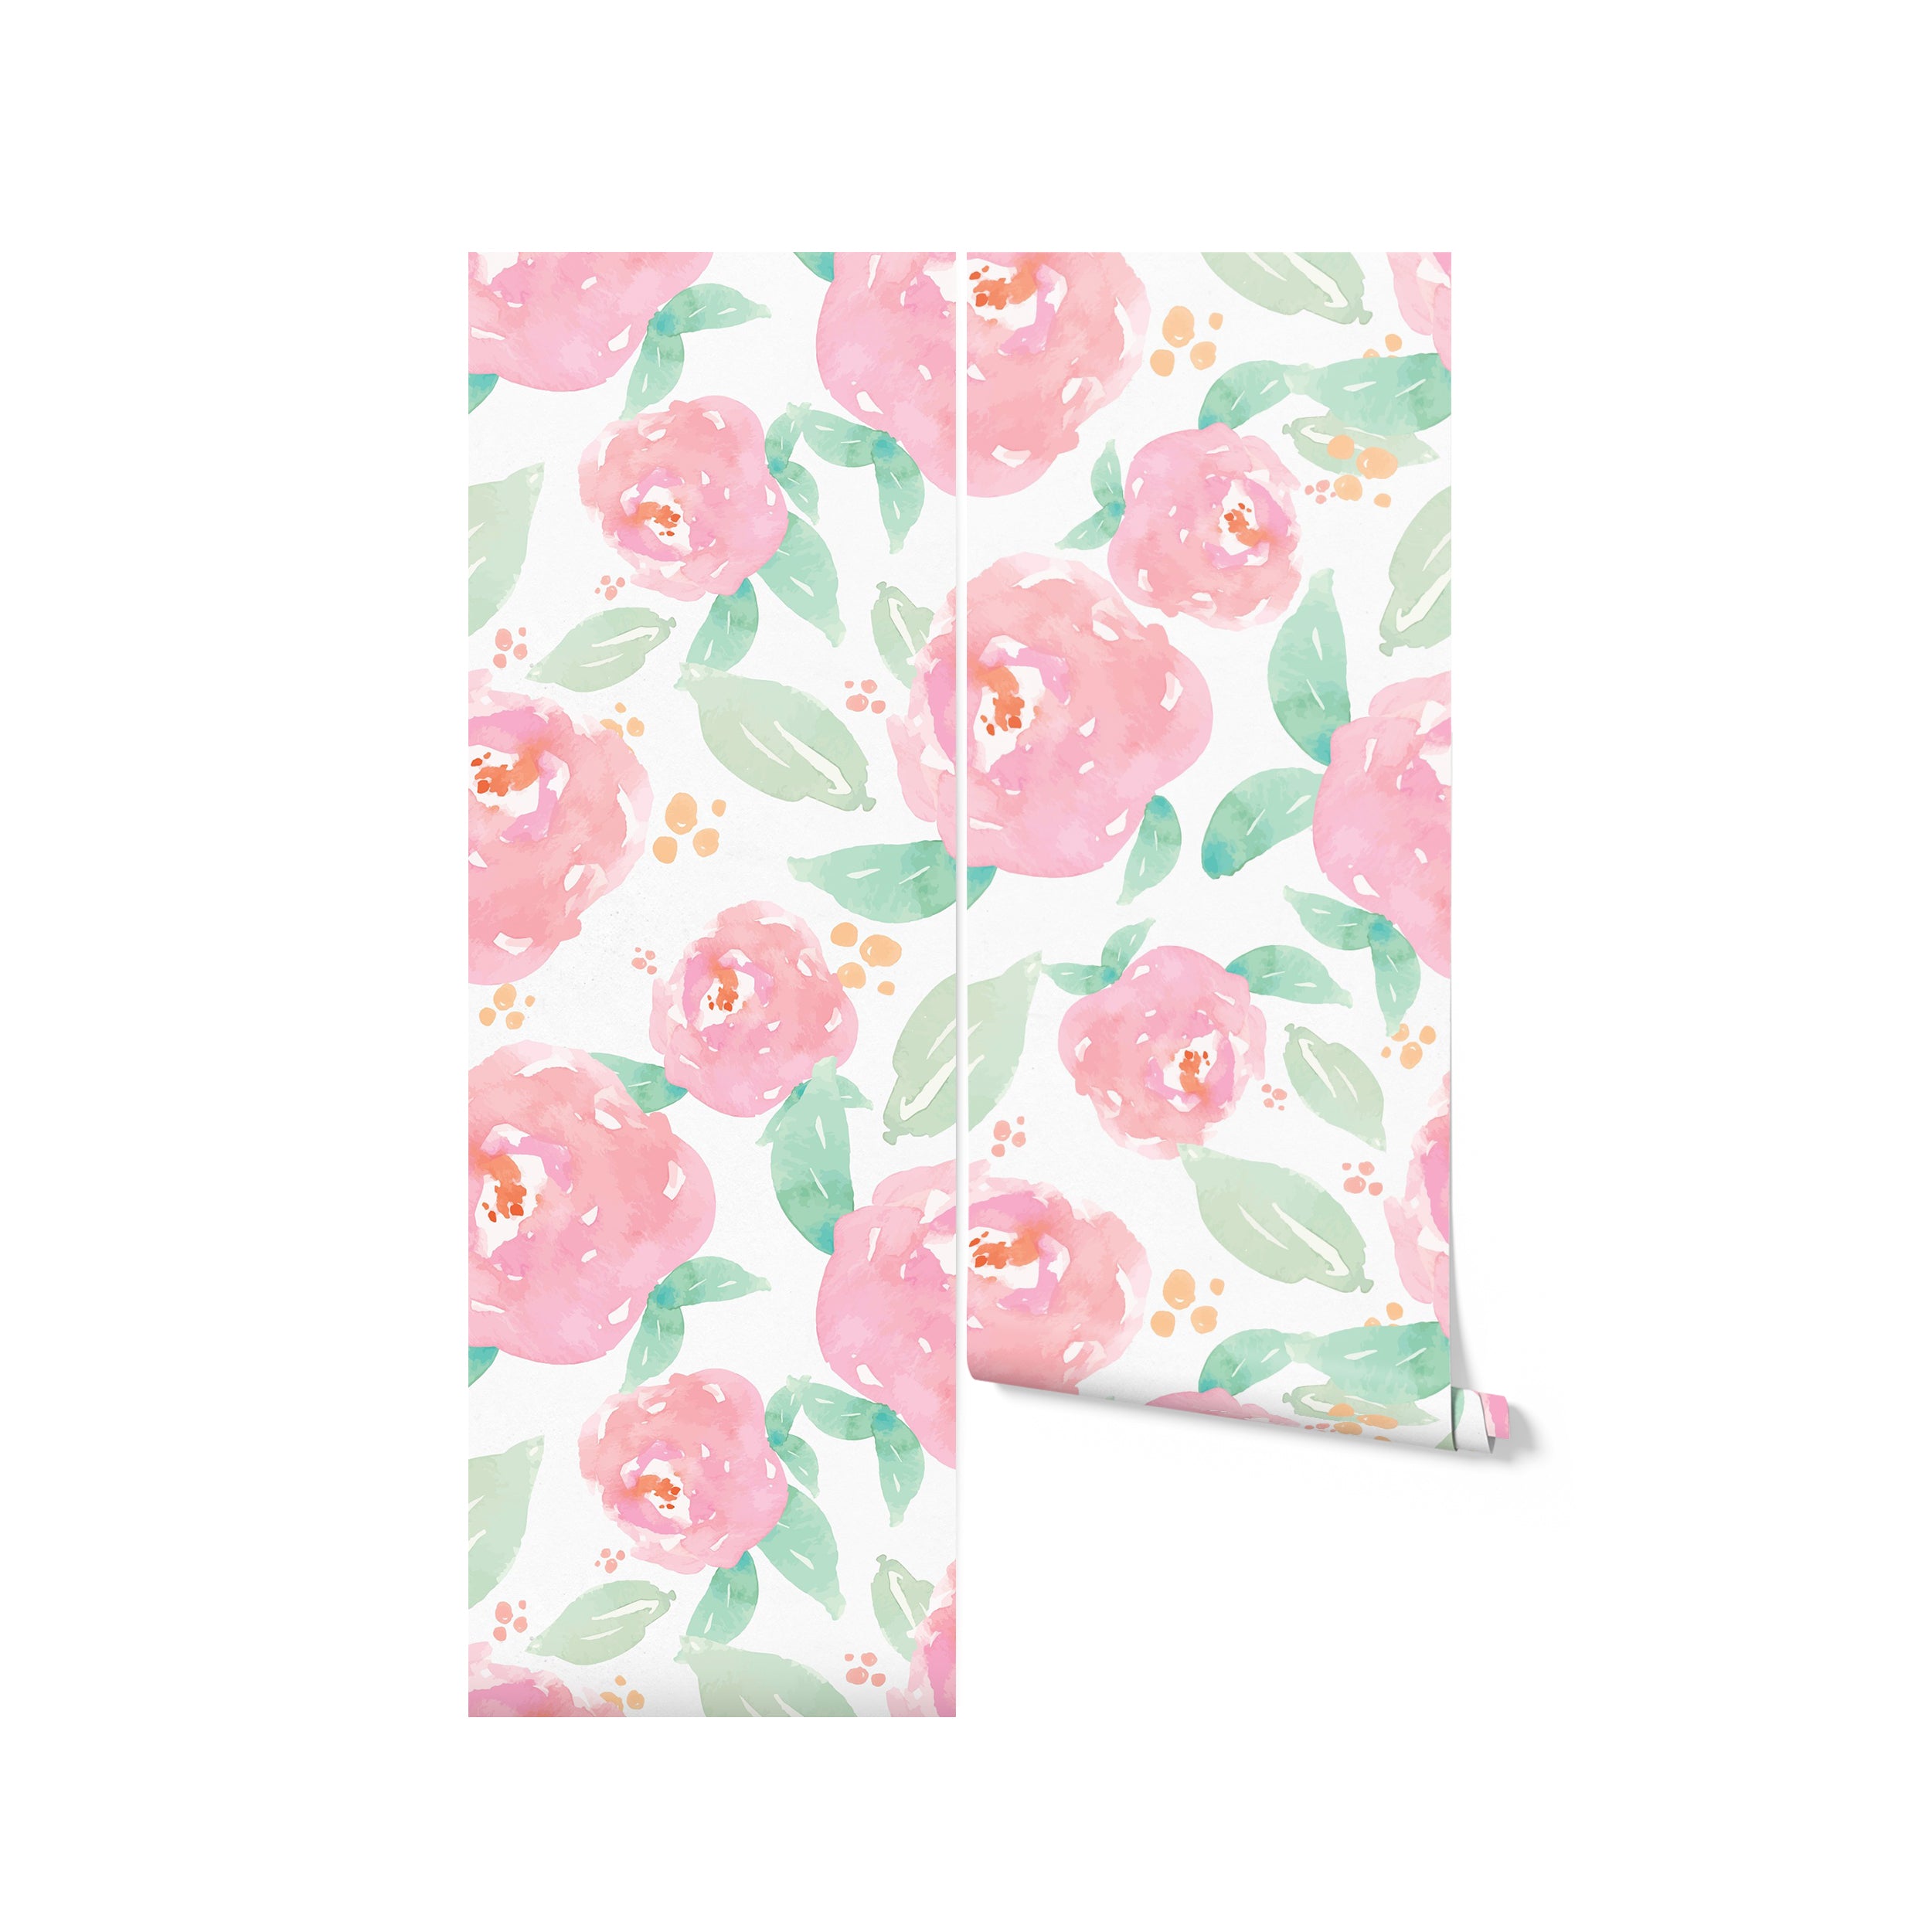 Roll of bright nursery floral wallpaper with hand-painted style pink peonies and green foliage